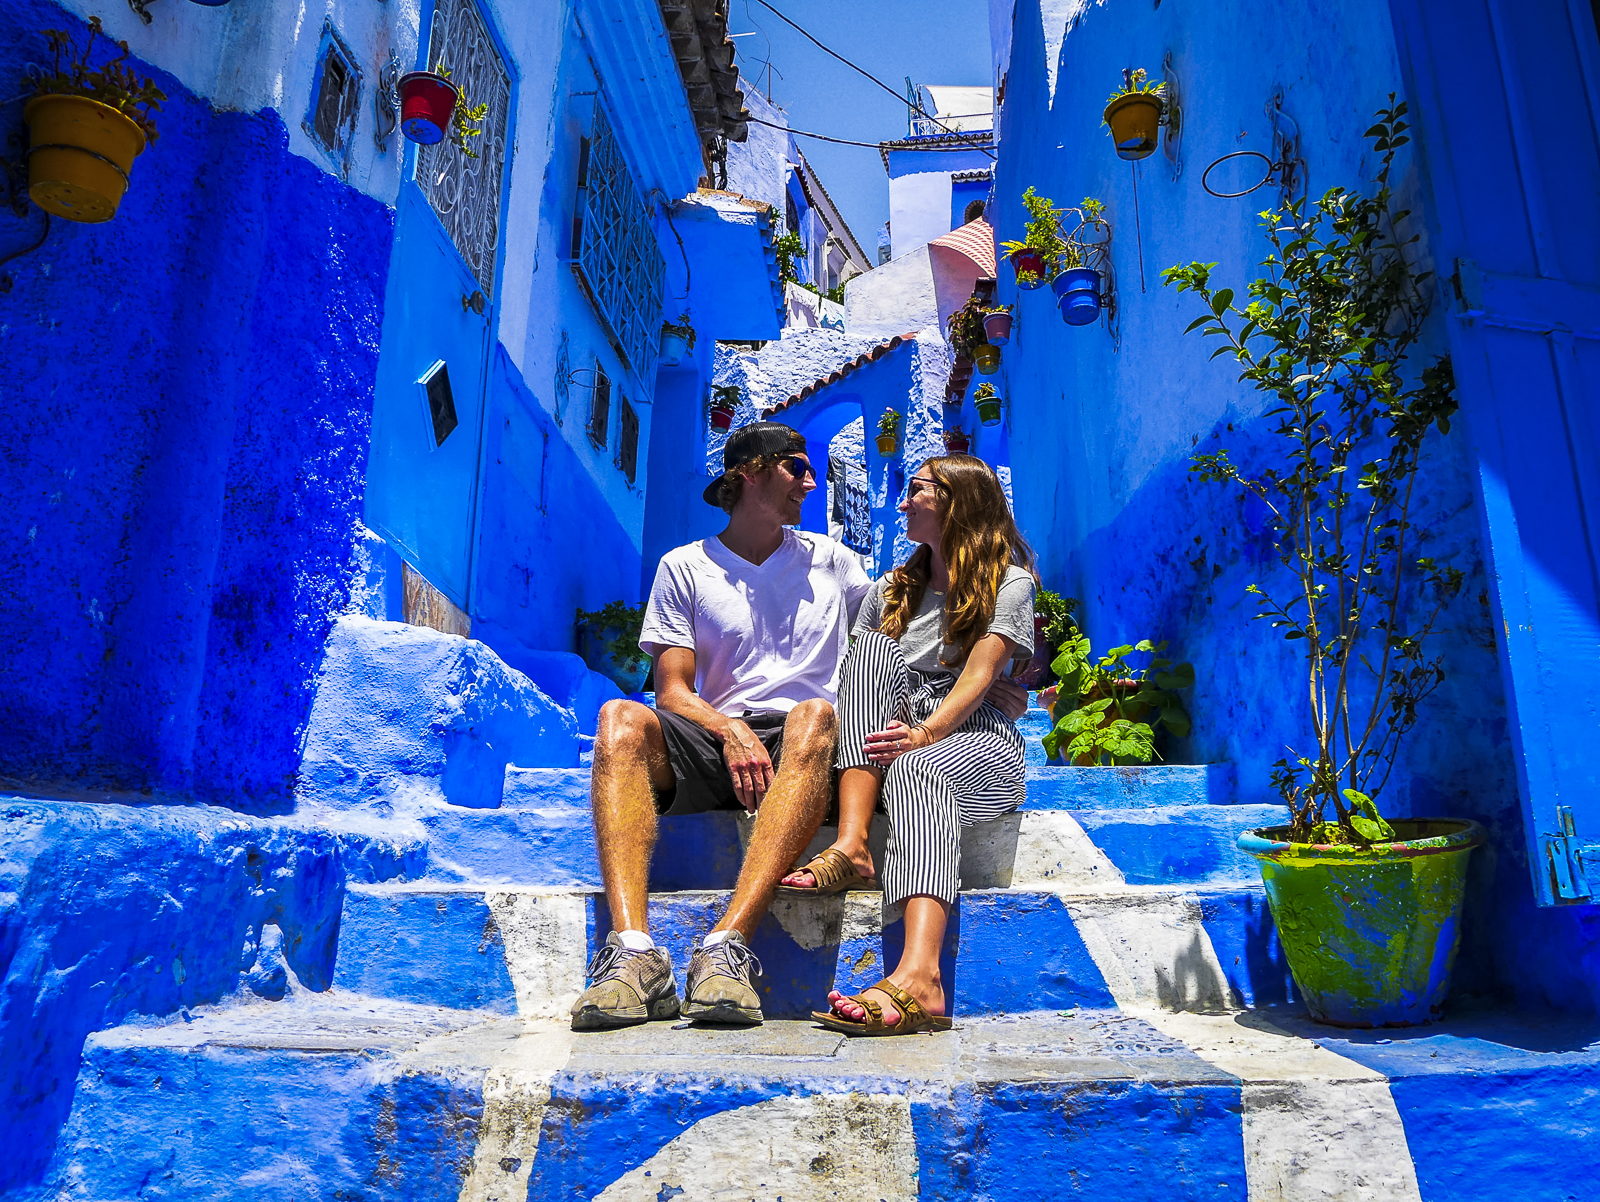 In the blue city of Morocco - Chefchaouen